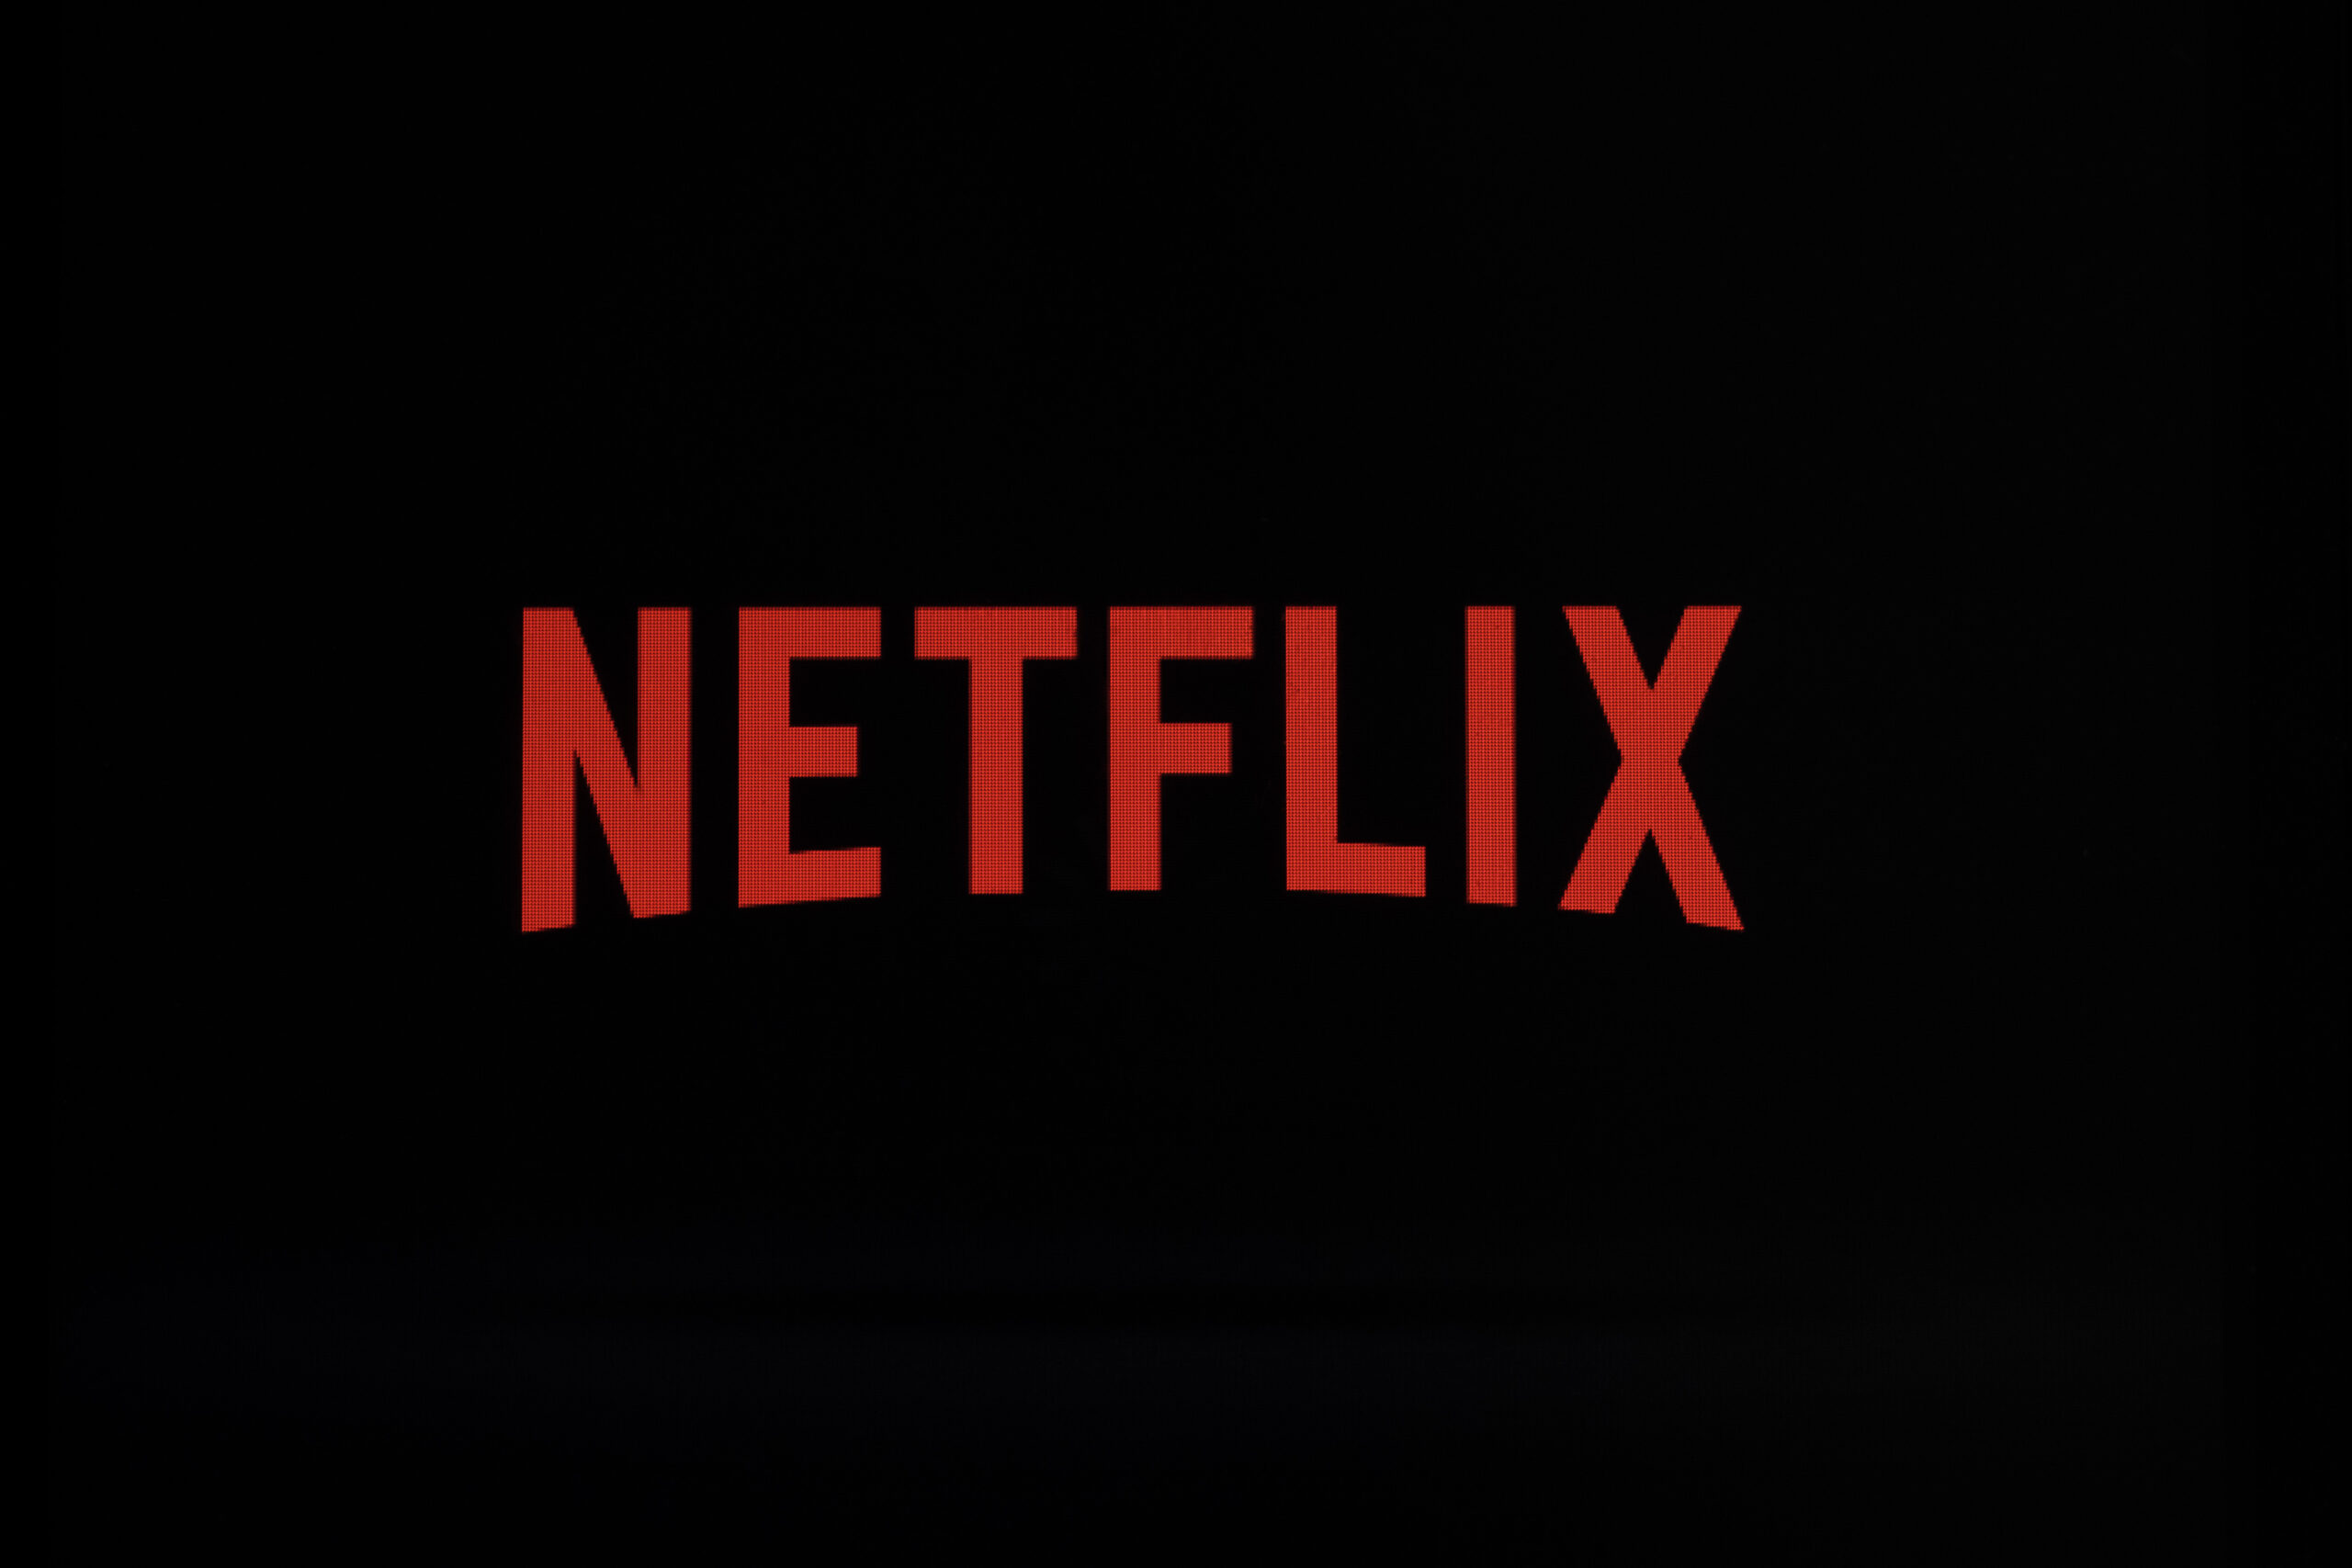 Netflix will charge additional $8 month on Netflix password sharing